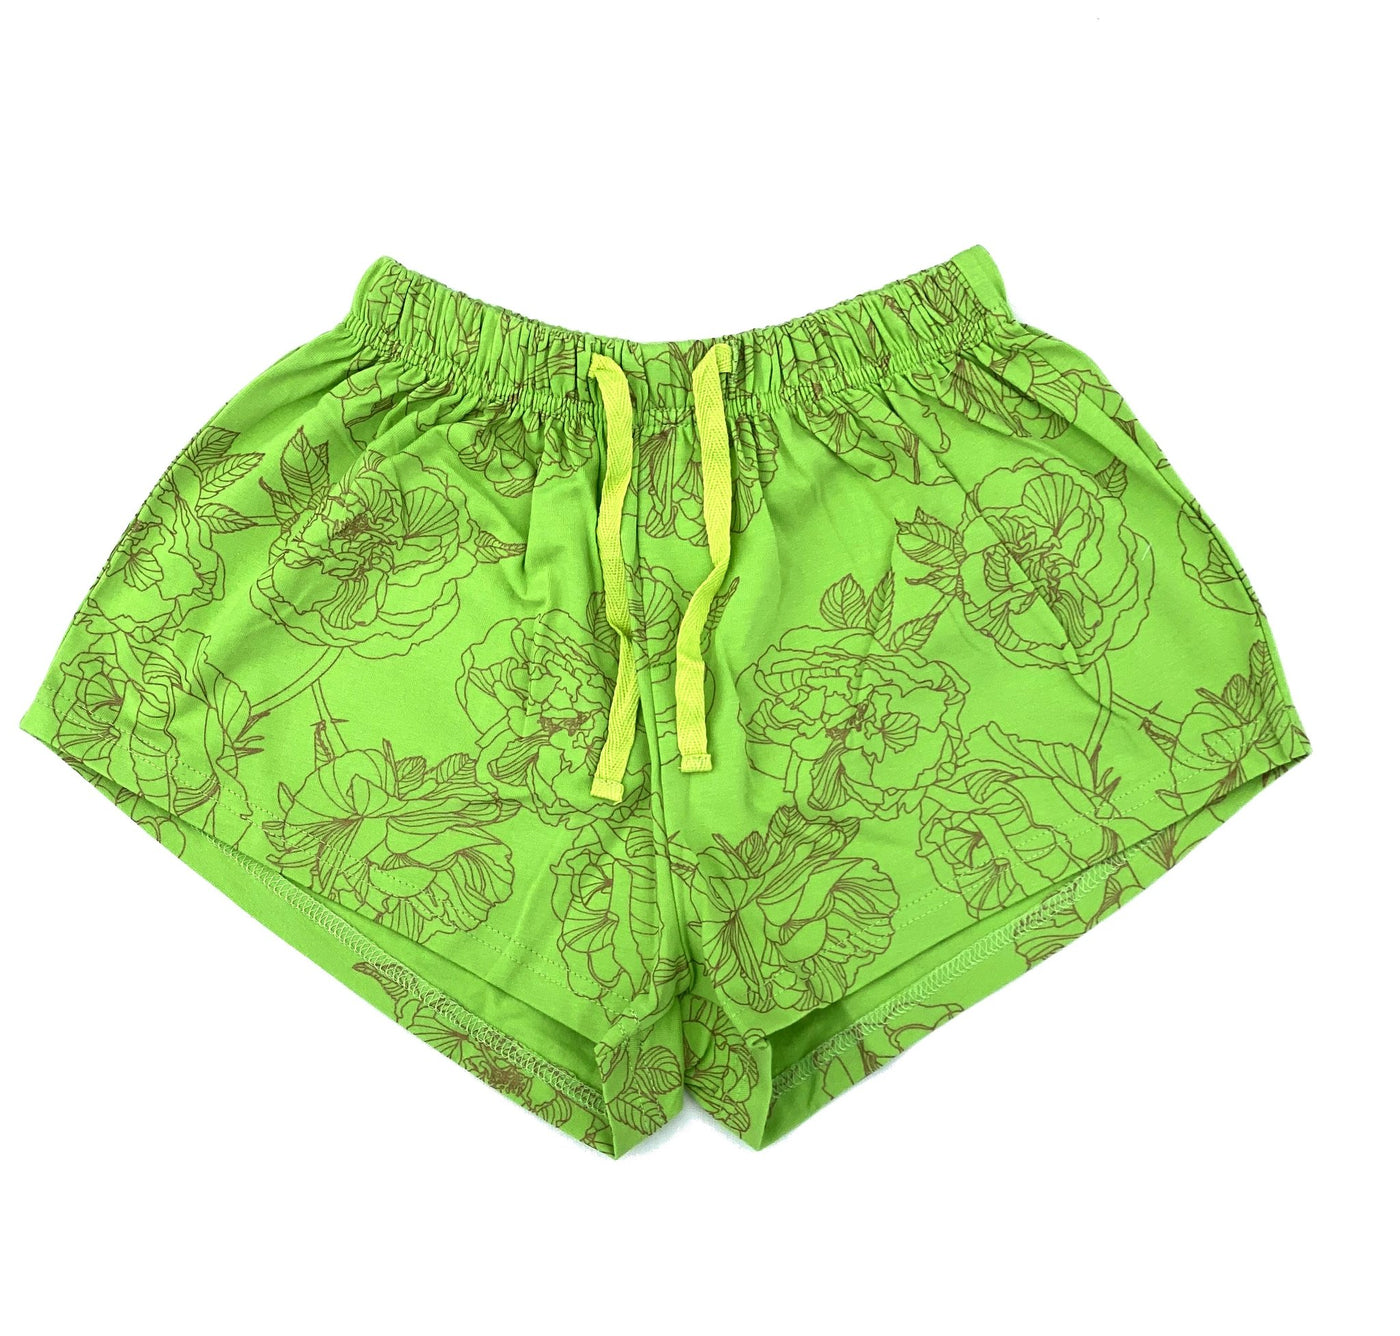 A Little Pocket Sweets Shorts - Green With Gold Shimmer Floral Print - Outlet Shop For Kids